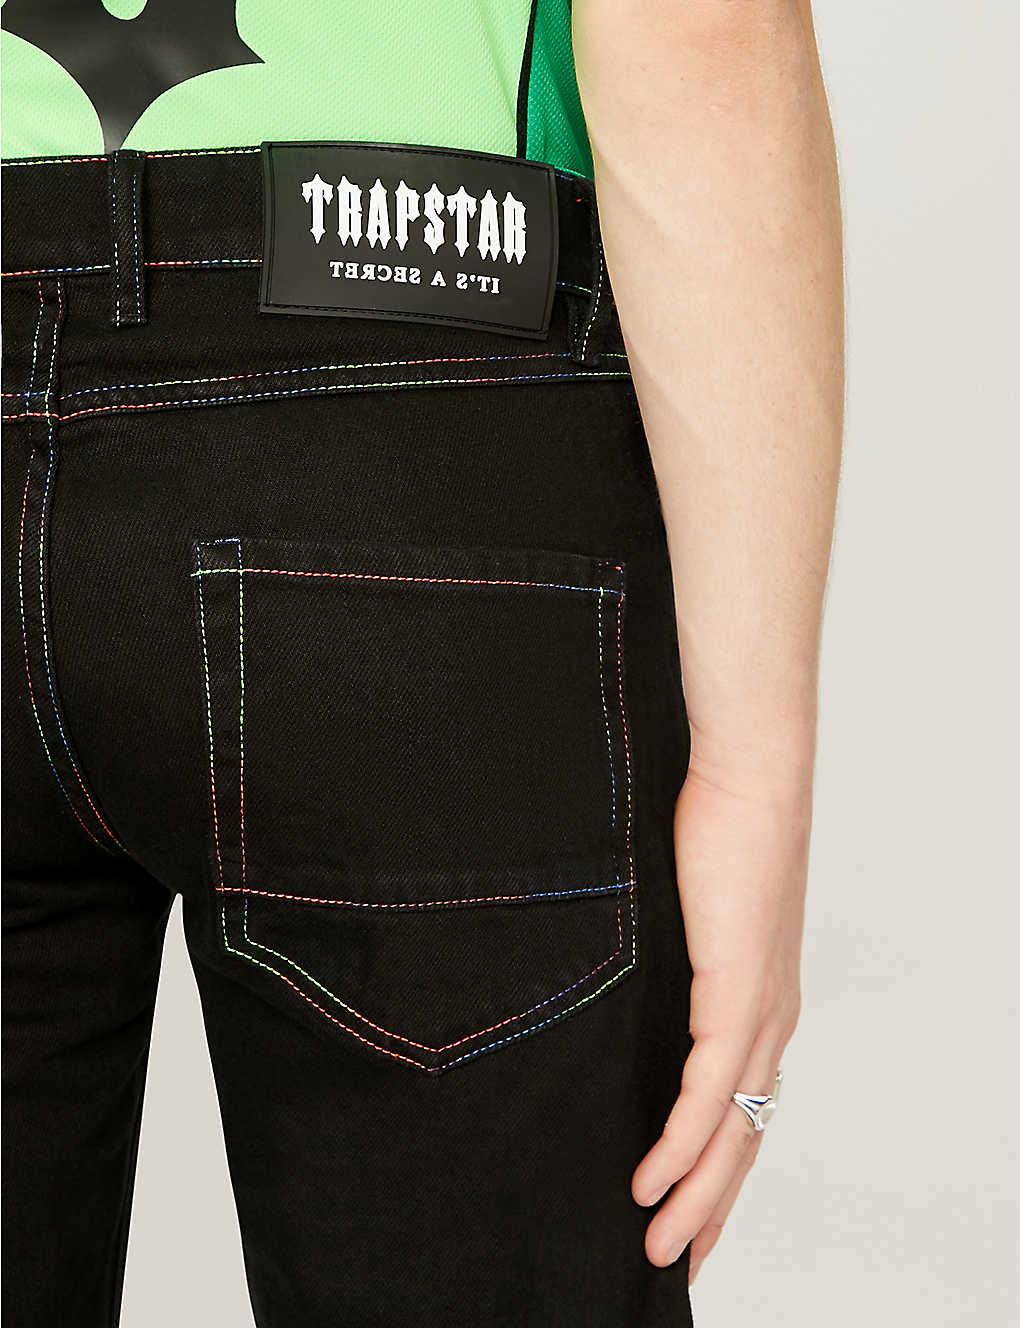 Have been looking everywhere for these Trapstar jeans, worn by